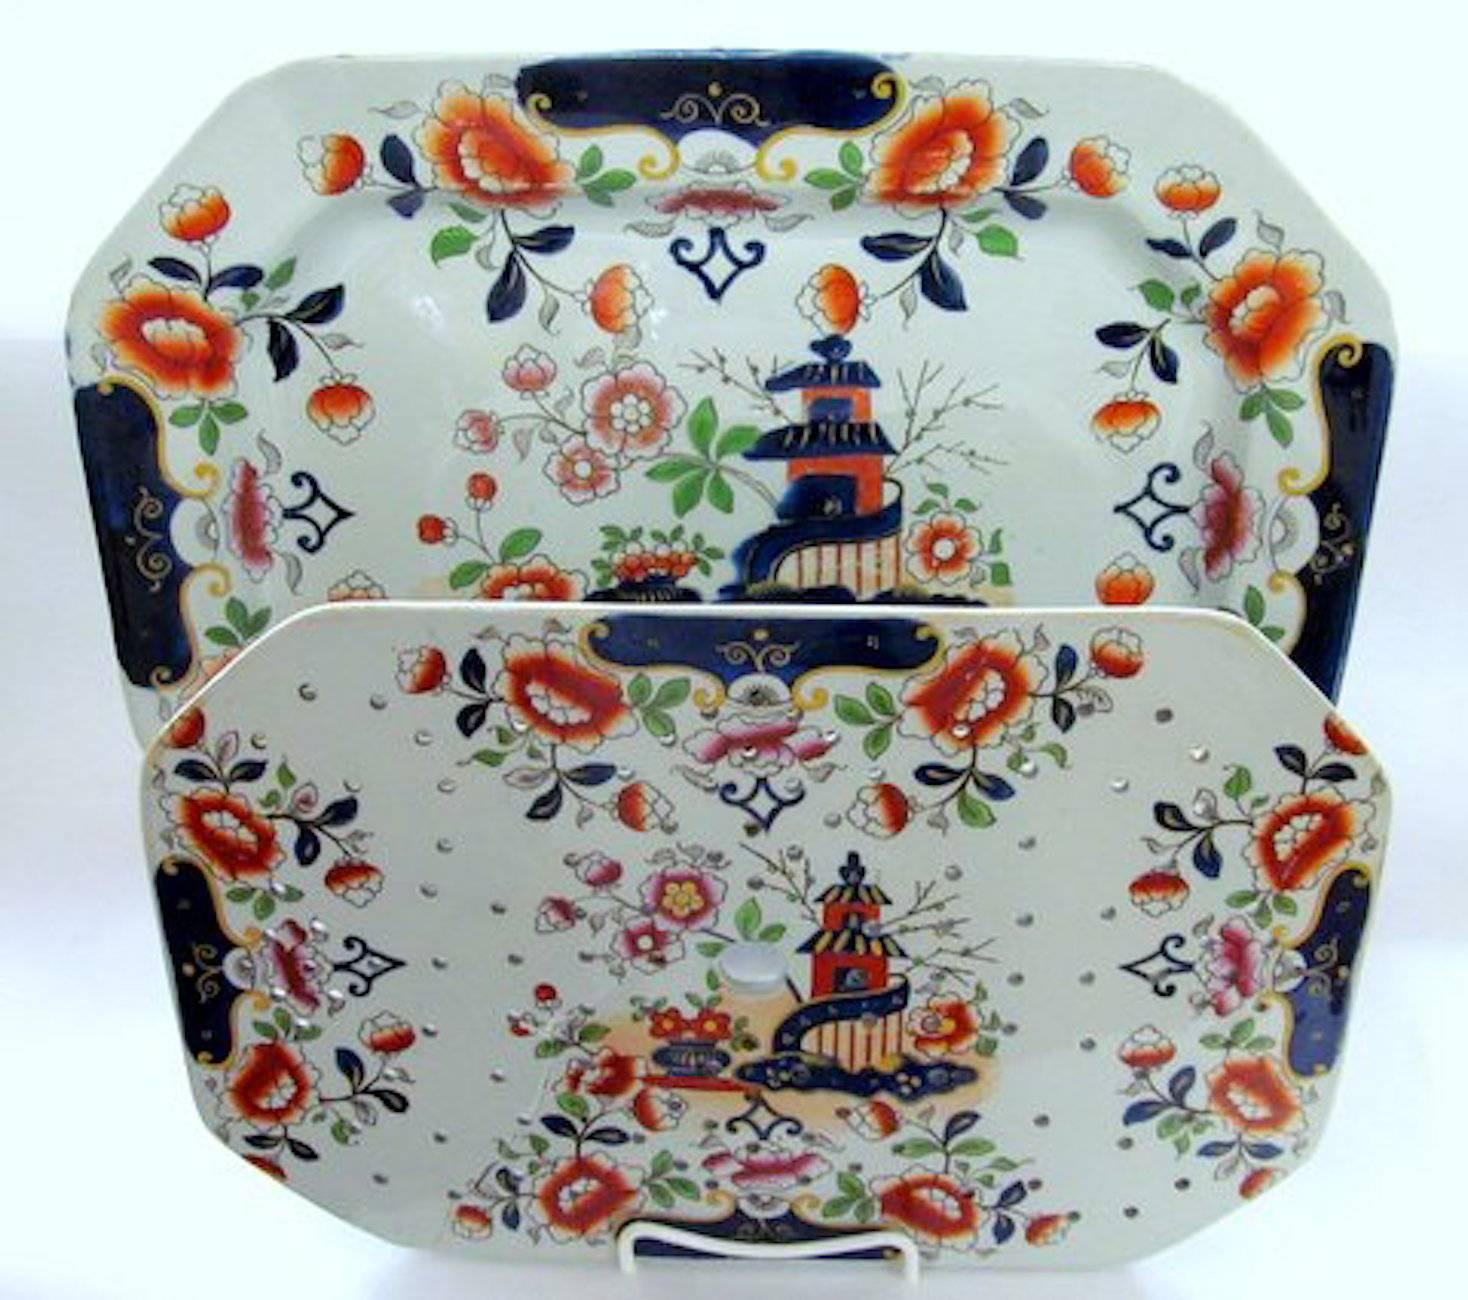 Fabulous quality antique English Hicks, Meigh and Johnson hand-painted ironstone China 